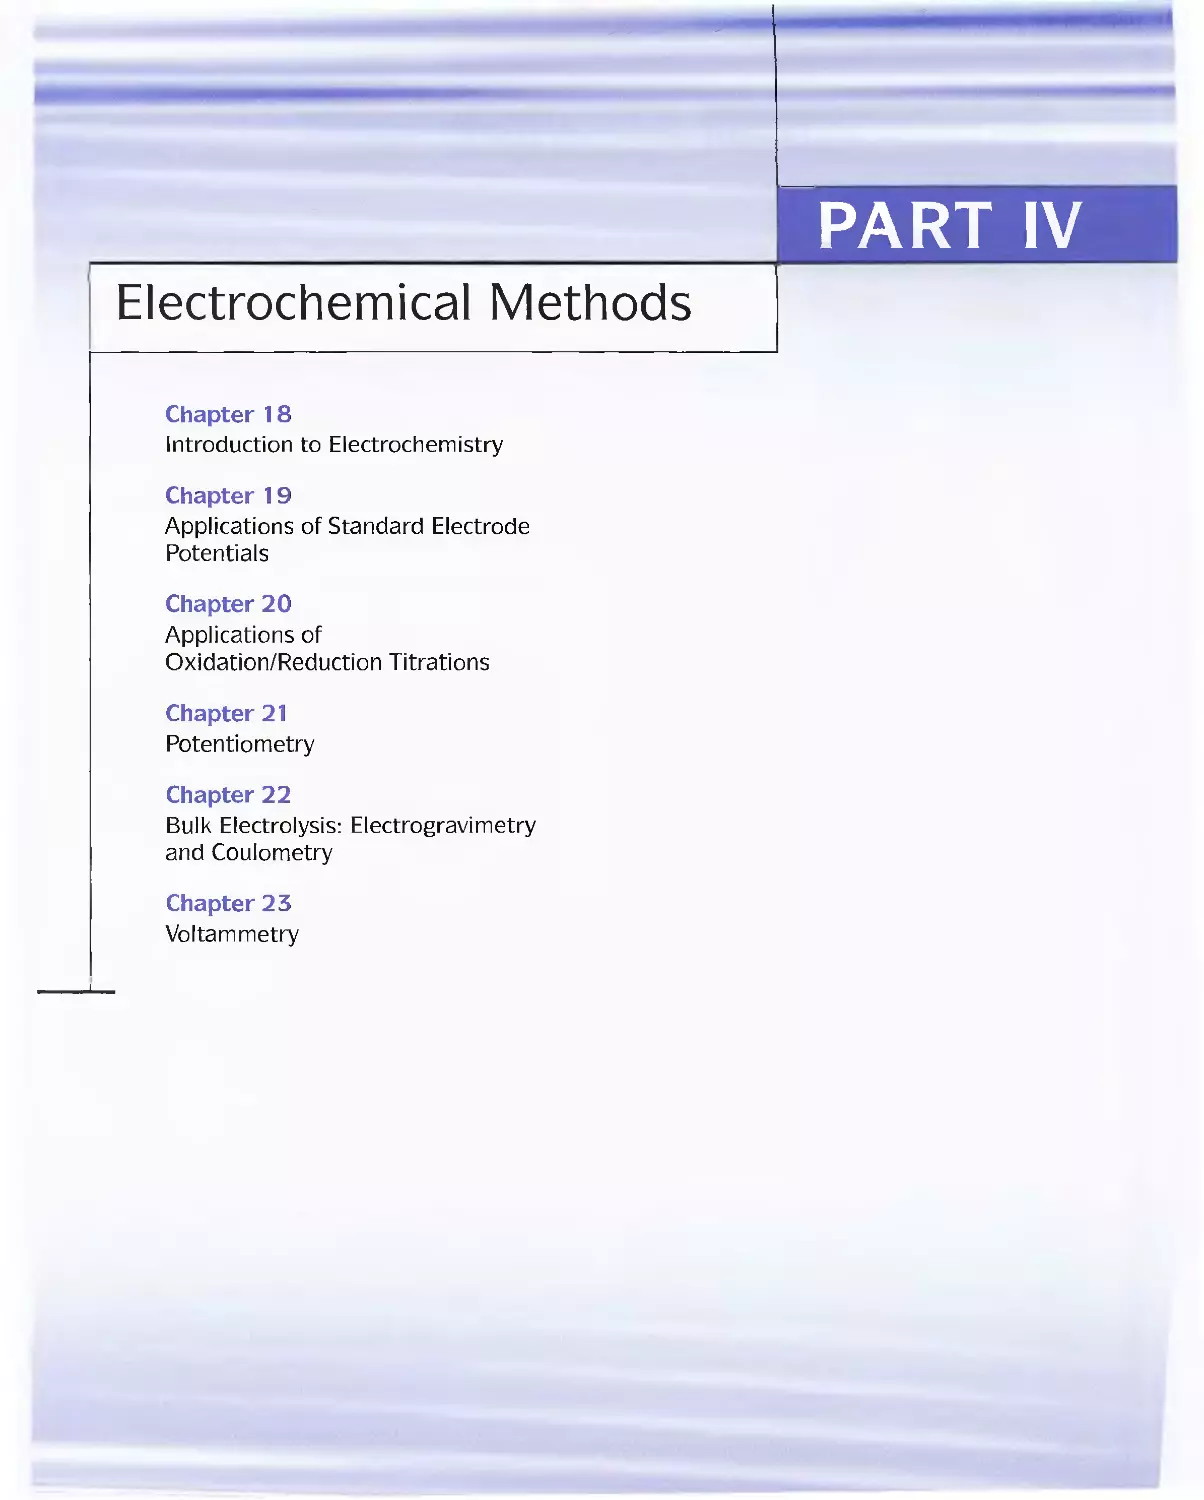 Part 4 - Electrochemical Methods